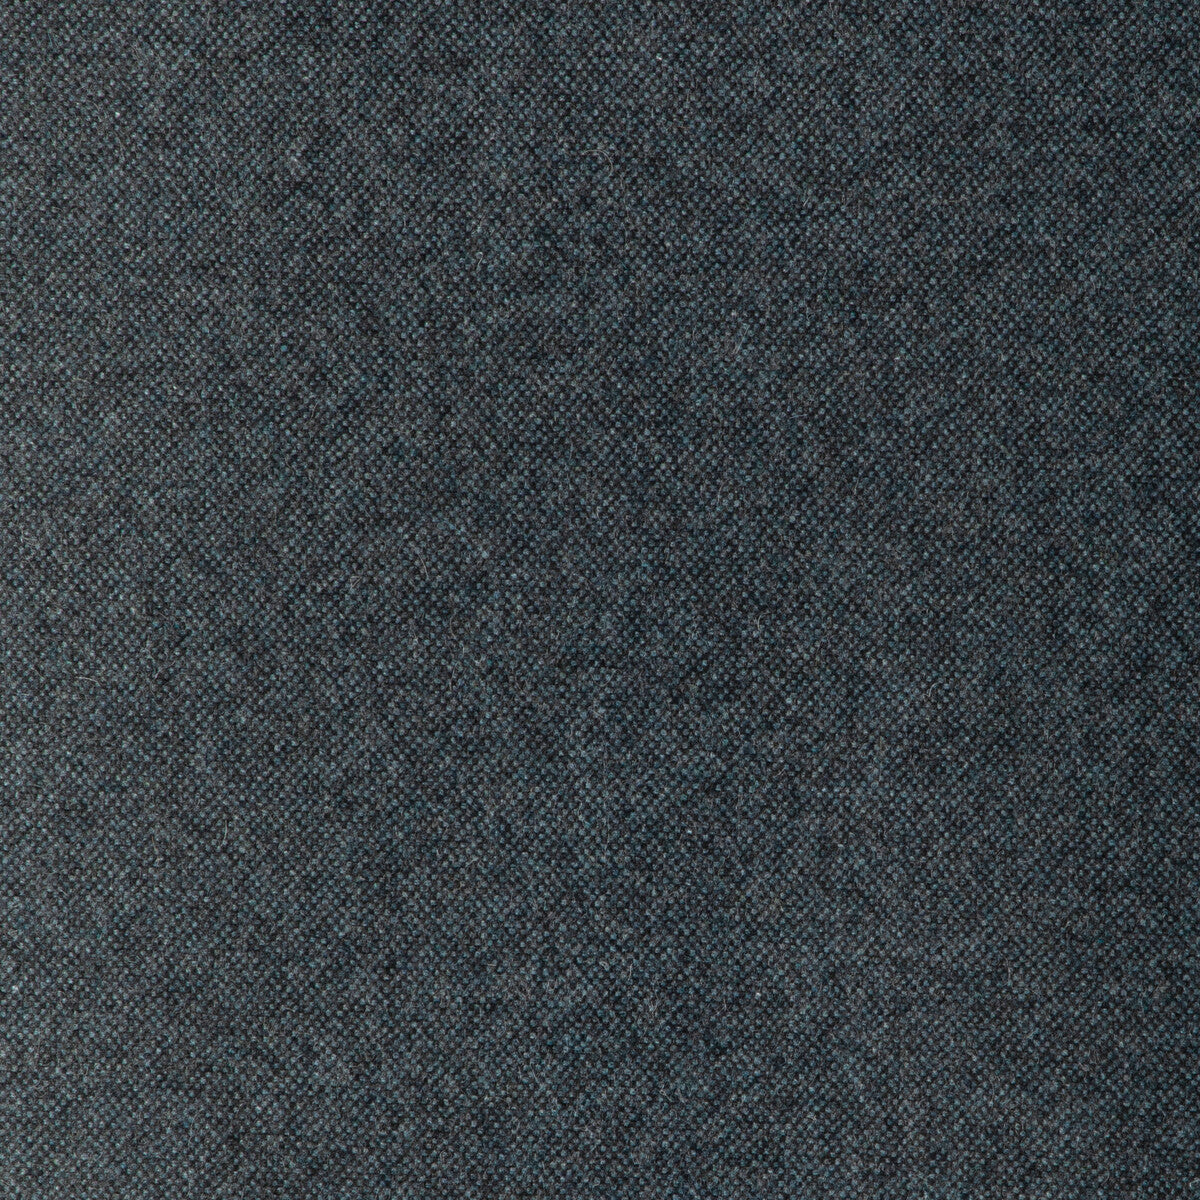 Manchester Wool fabric in midnight color - pattern 37026.513.0 - by Kravet Contract